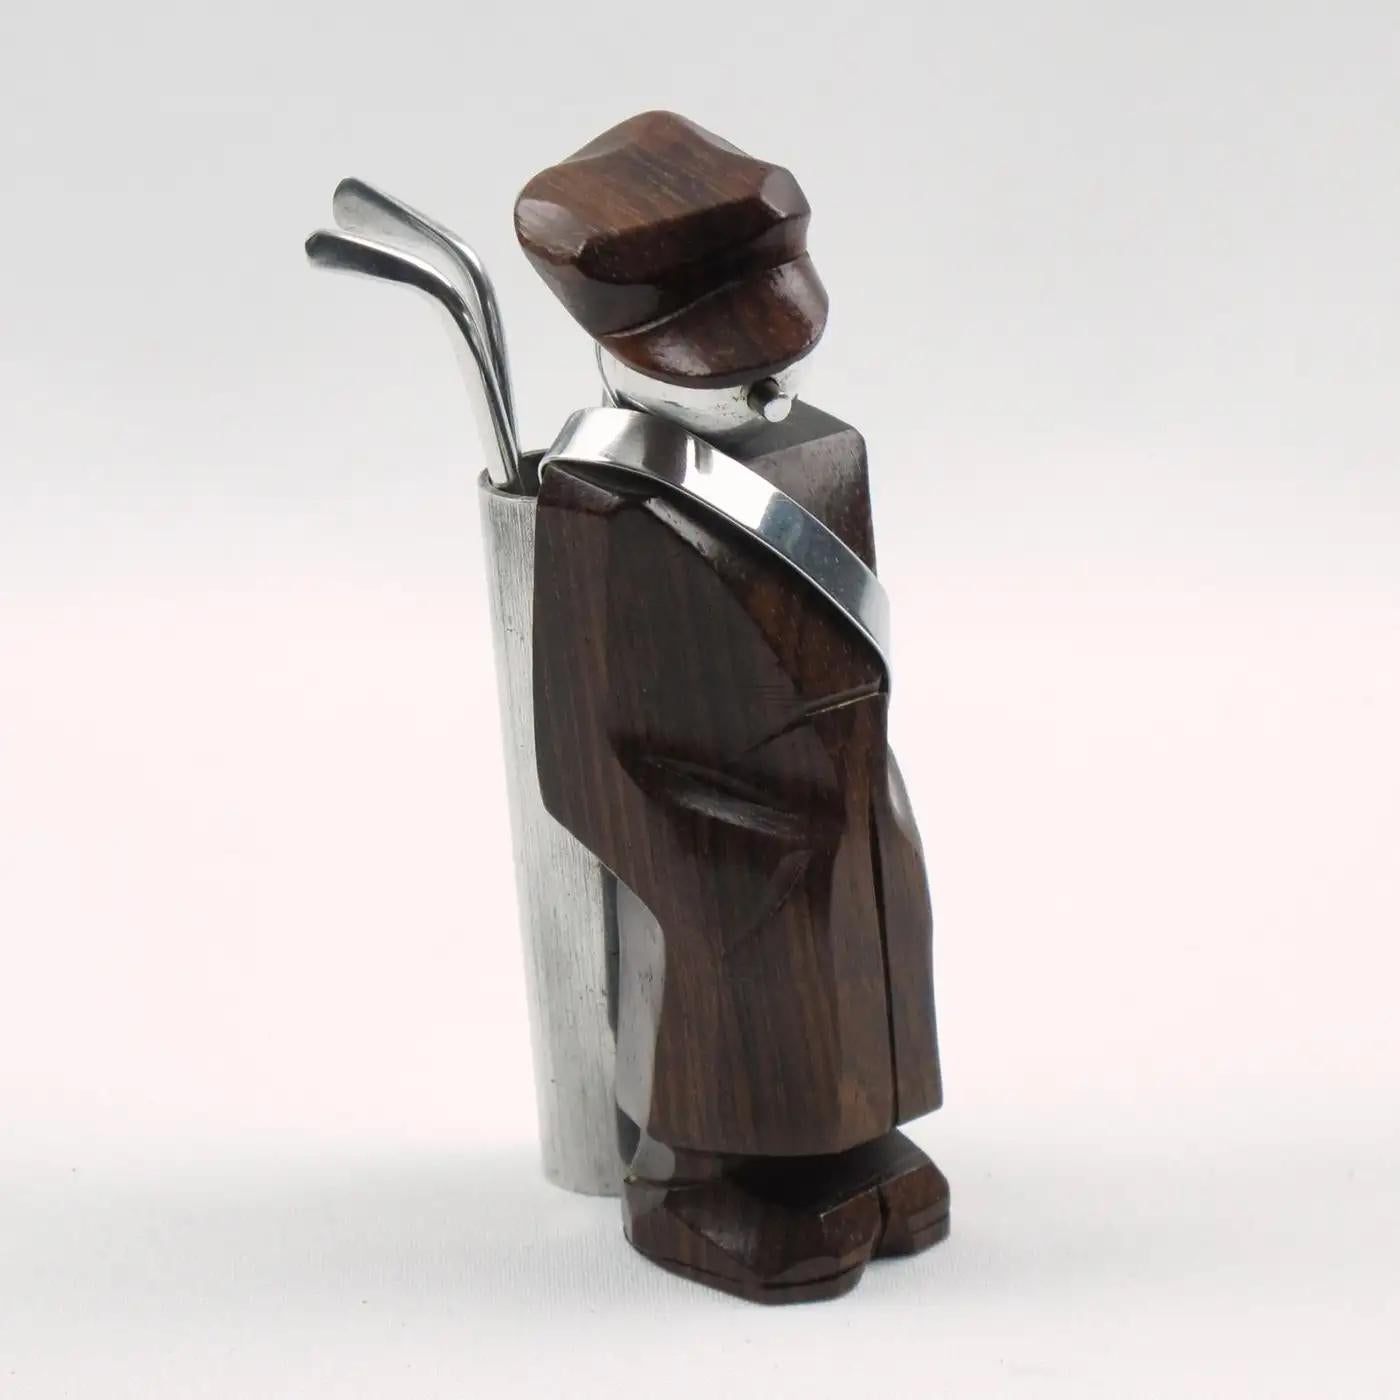 A cute French Art Deco barware cocktail set accessory made of wood and aluminum. The cocktail pick features a hand-carved Macassar wood golf caddie figurine with a carved cap and cast aluminum metalhead. The club holder has three metal cocktail